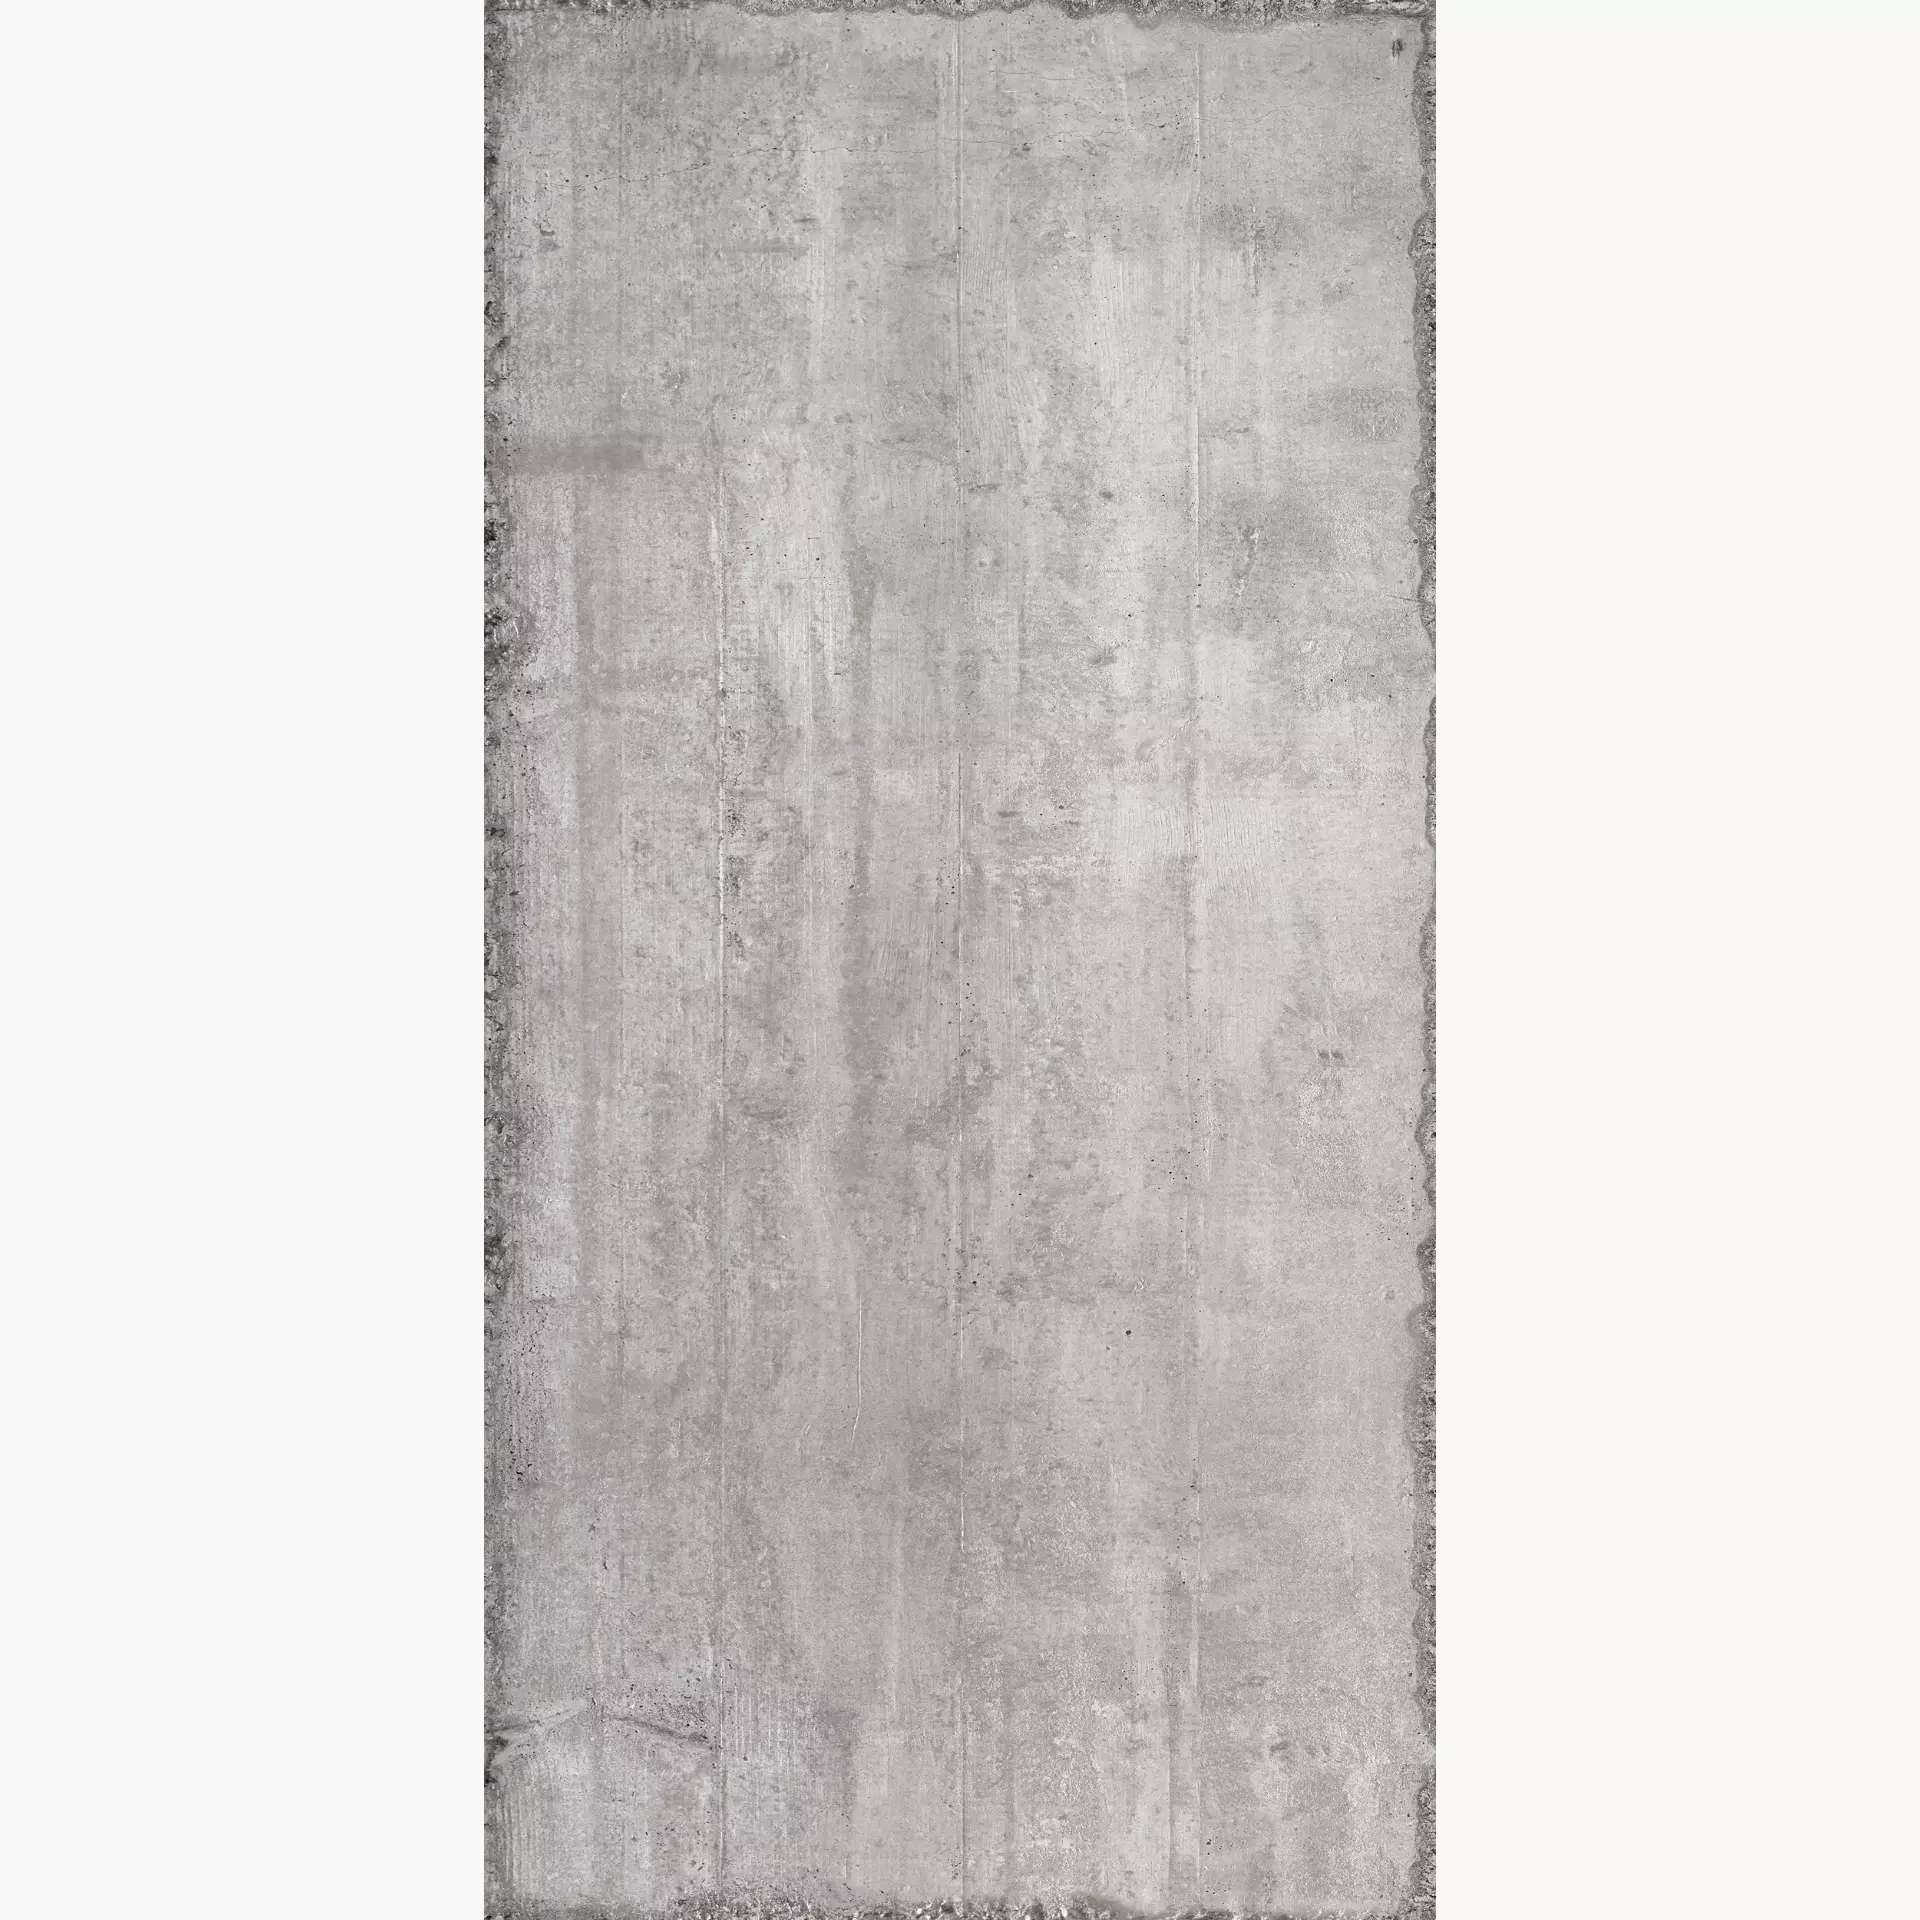 Sant Agostino Form Grey Natural CSAFORGR12 60x120cm rectified 10mm